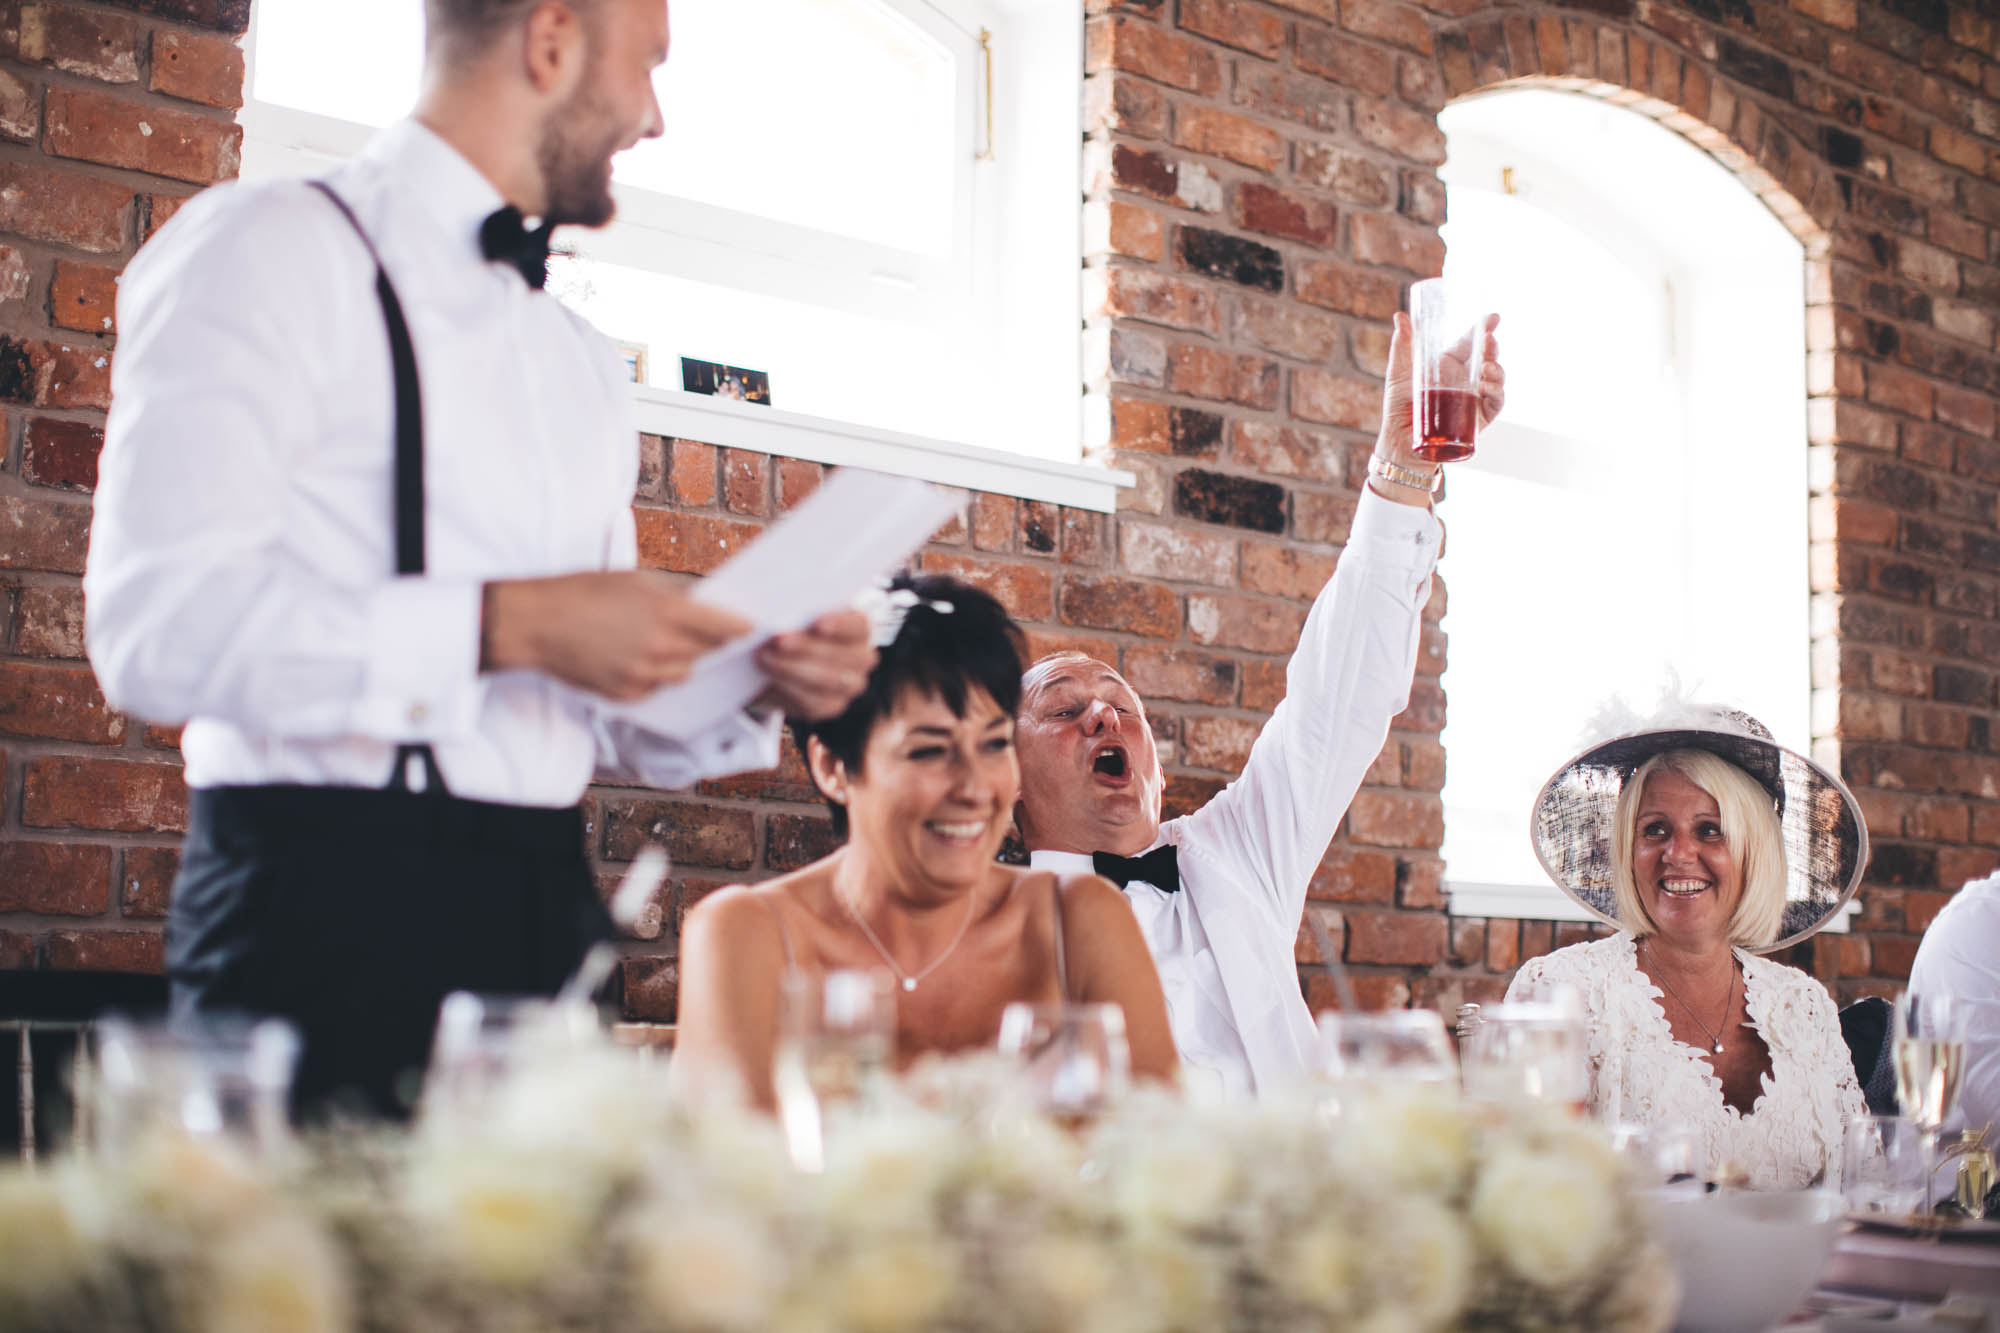 Father of Groom raises his glass enthusiastically as Groom gives speech